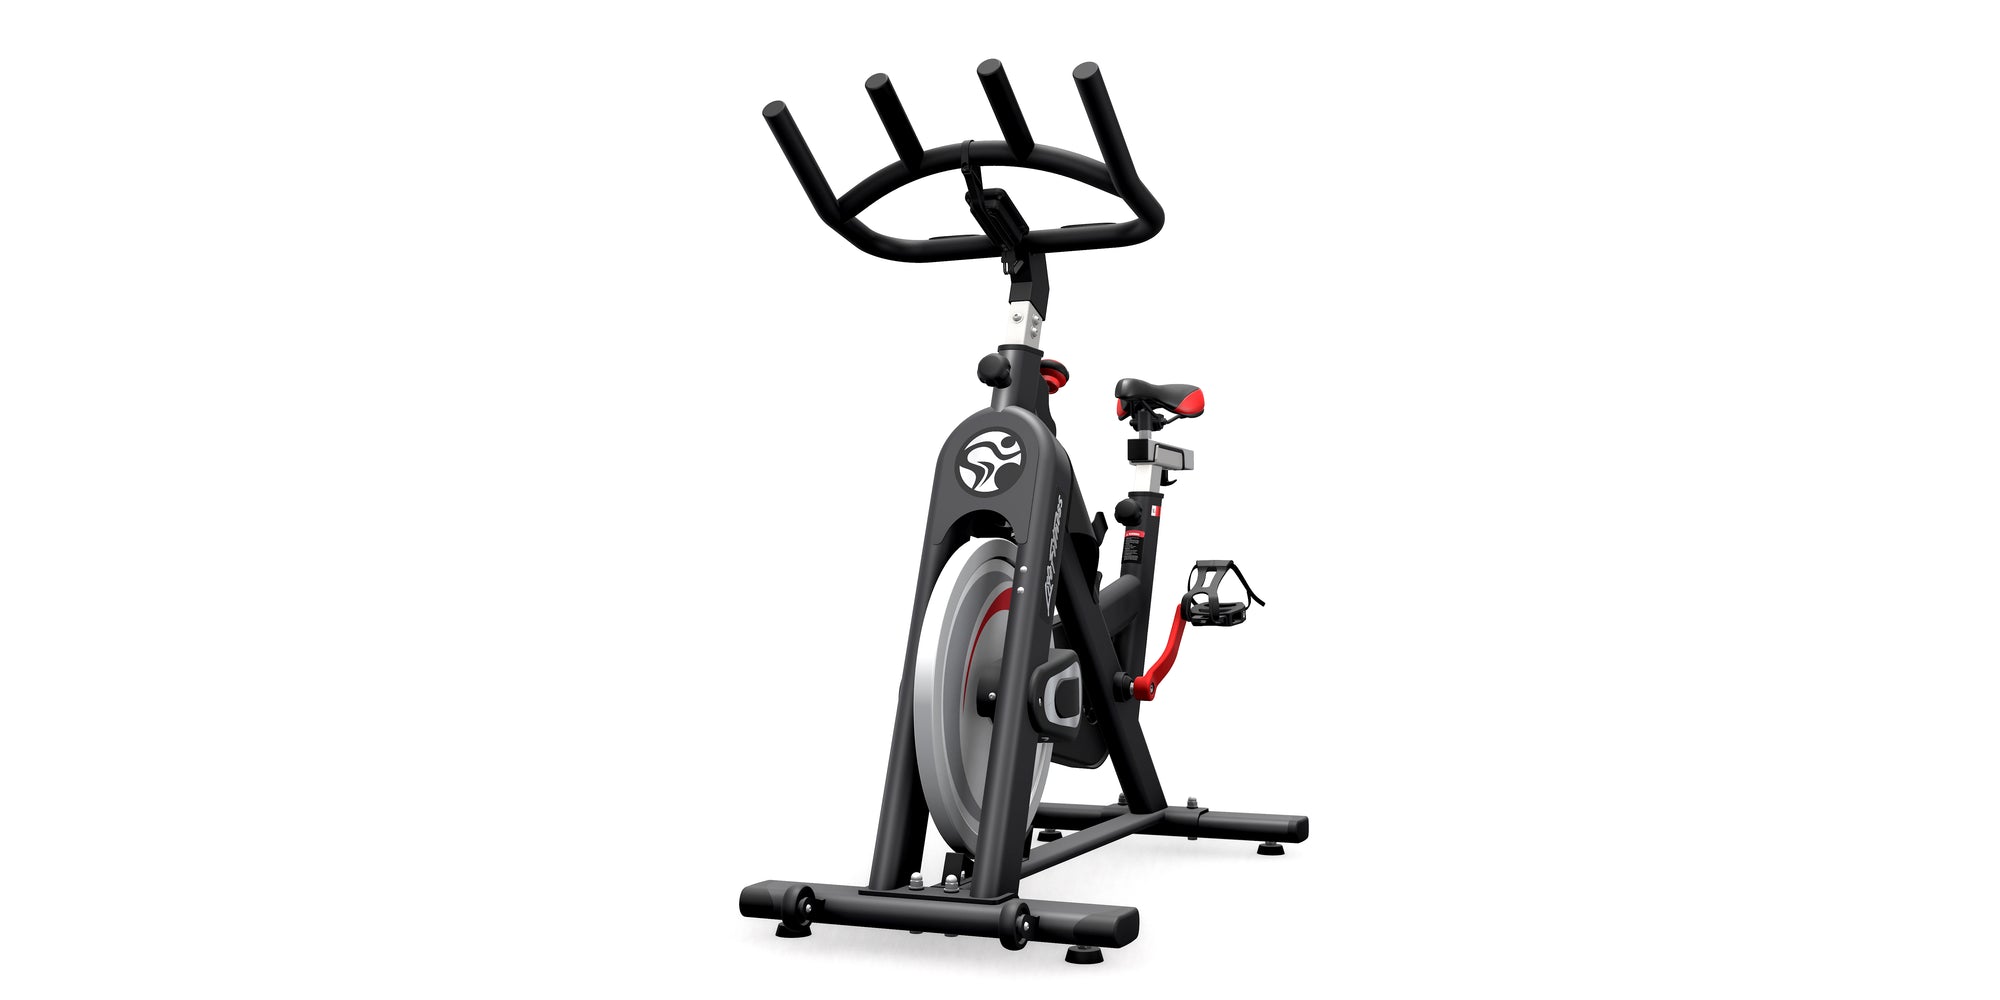 IC1 Indoor Cycle - $2205.49 + gst (Home use only)